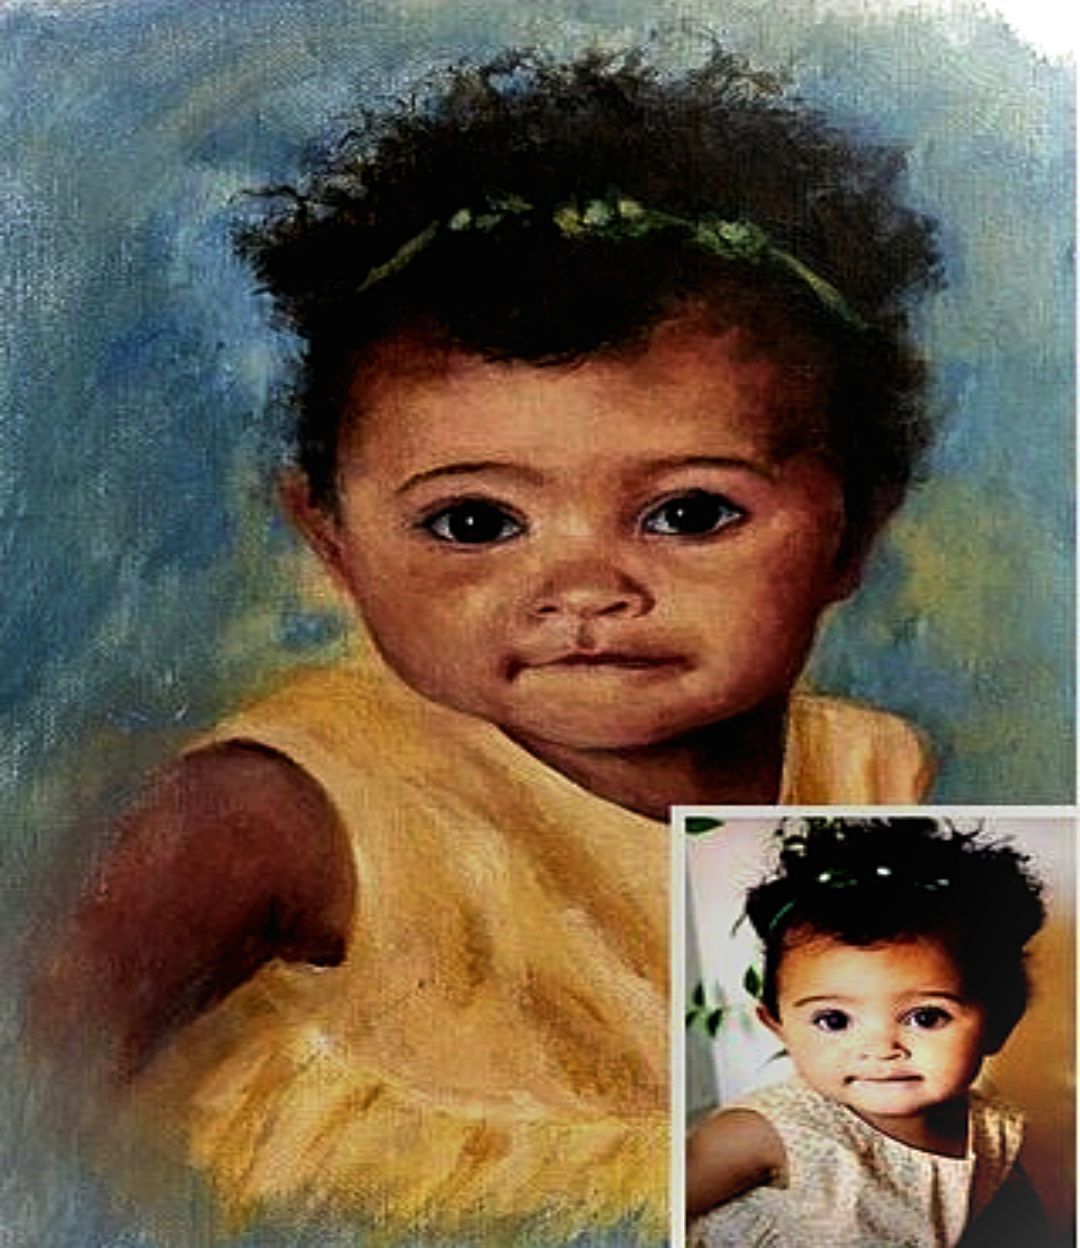 ACRYLIC BABY PORTRAITS PAINTING from photo